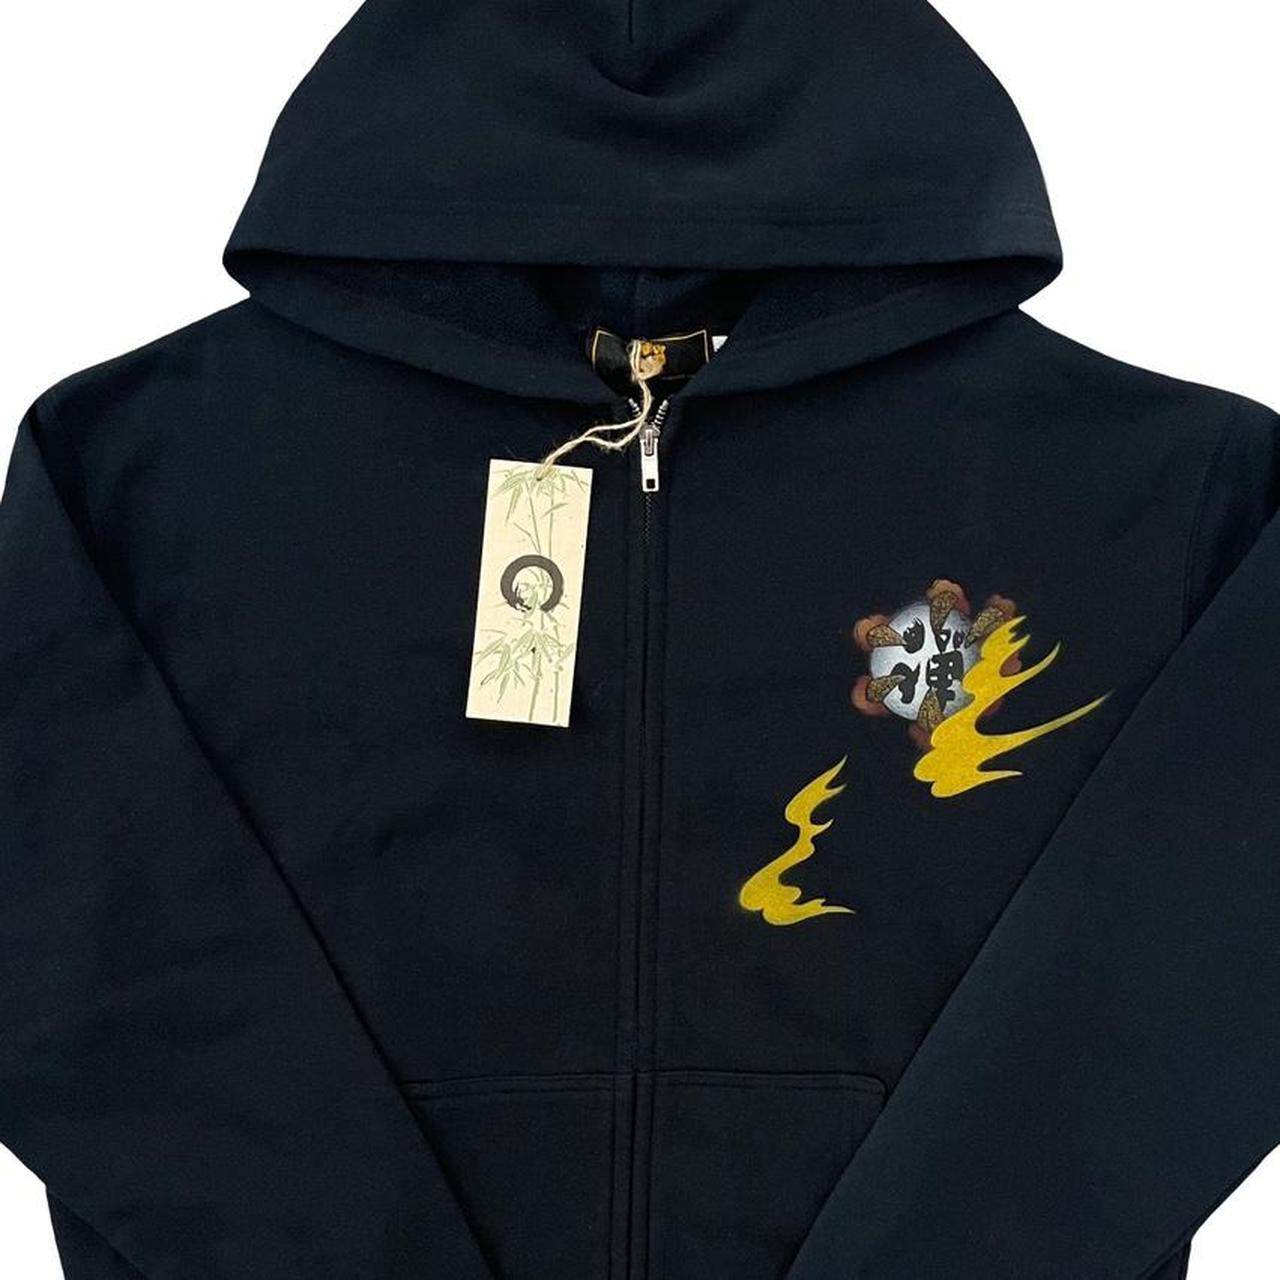 Zen Airbrushed Hoodie - Known Source